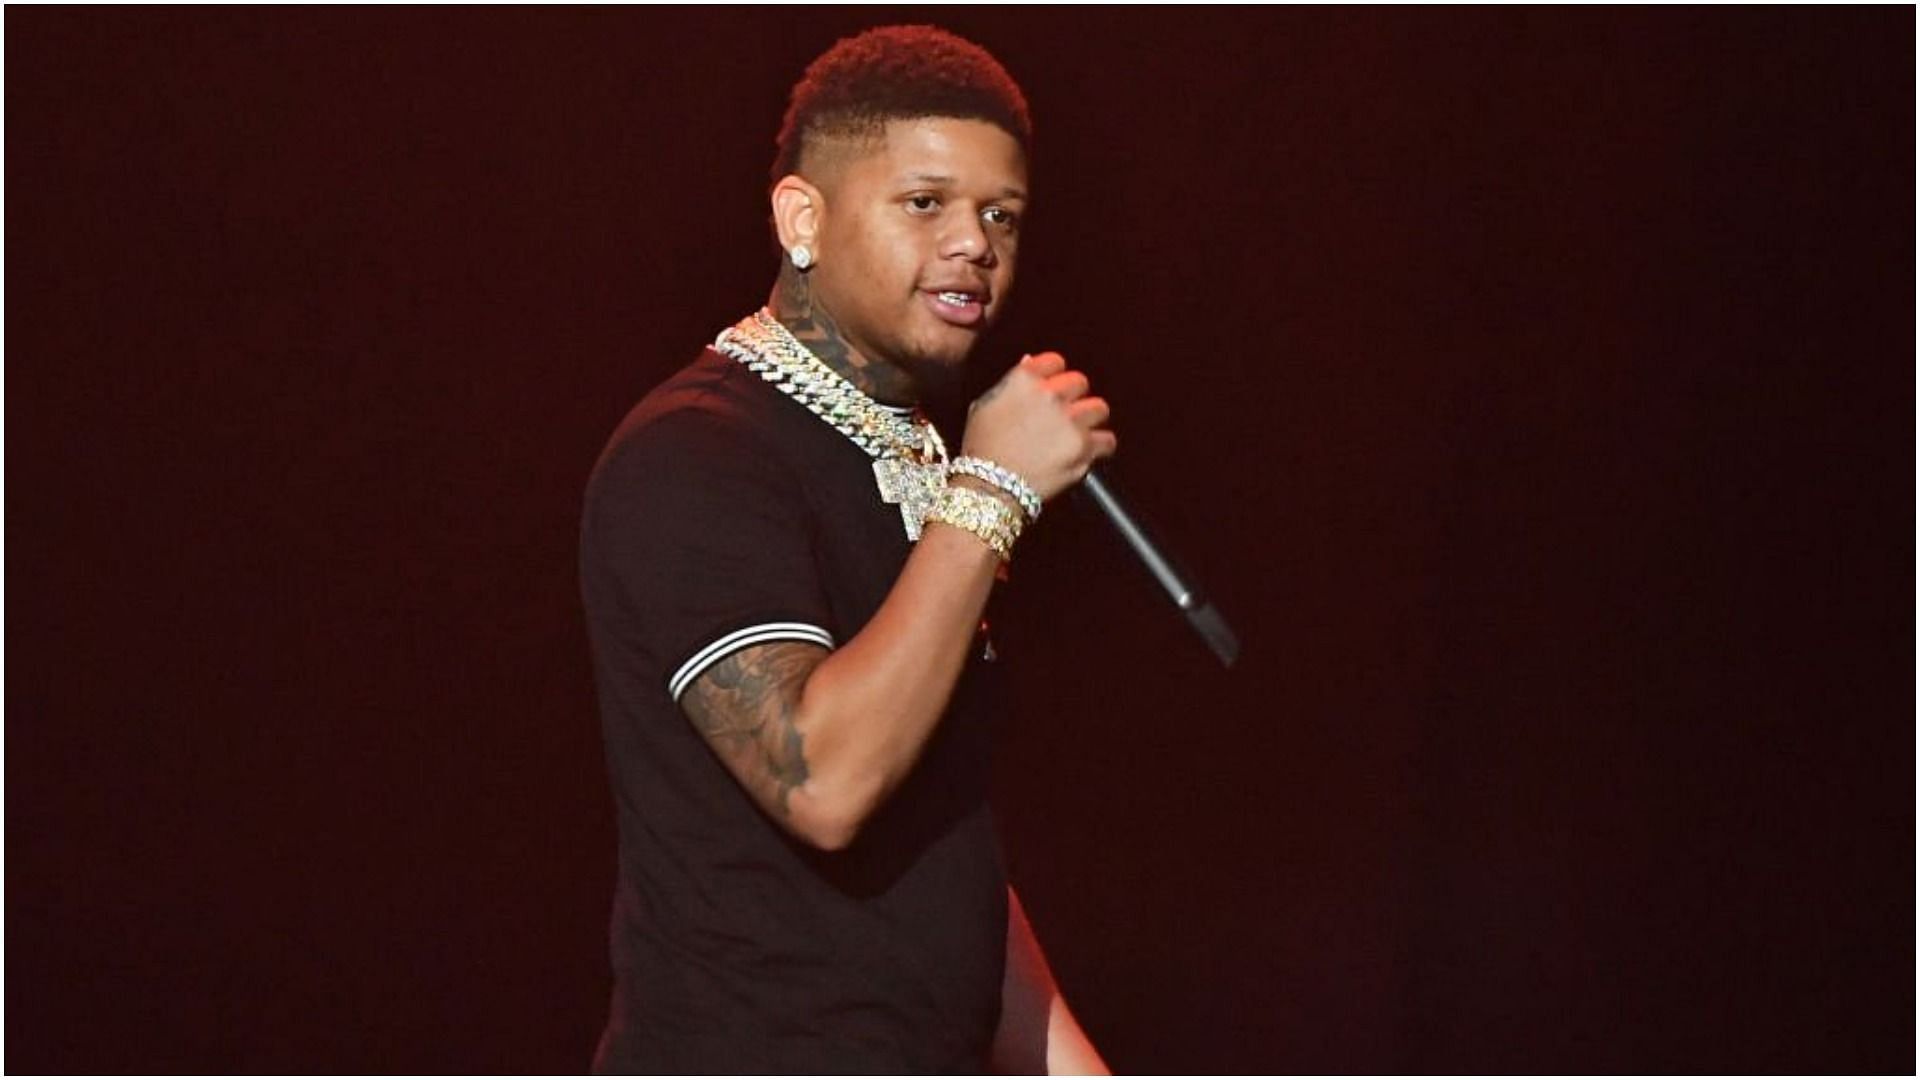 Yella Beezy was accused of some severe charges in 2021 (Image via Paras Griffin/Getty Images)